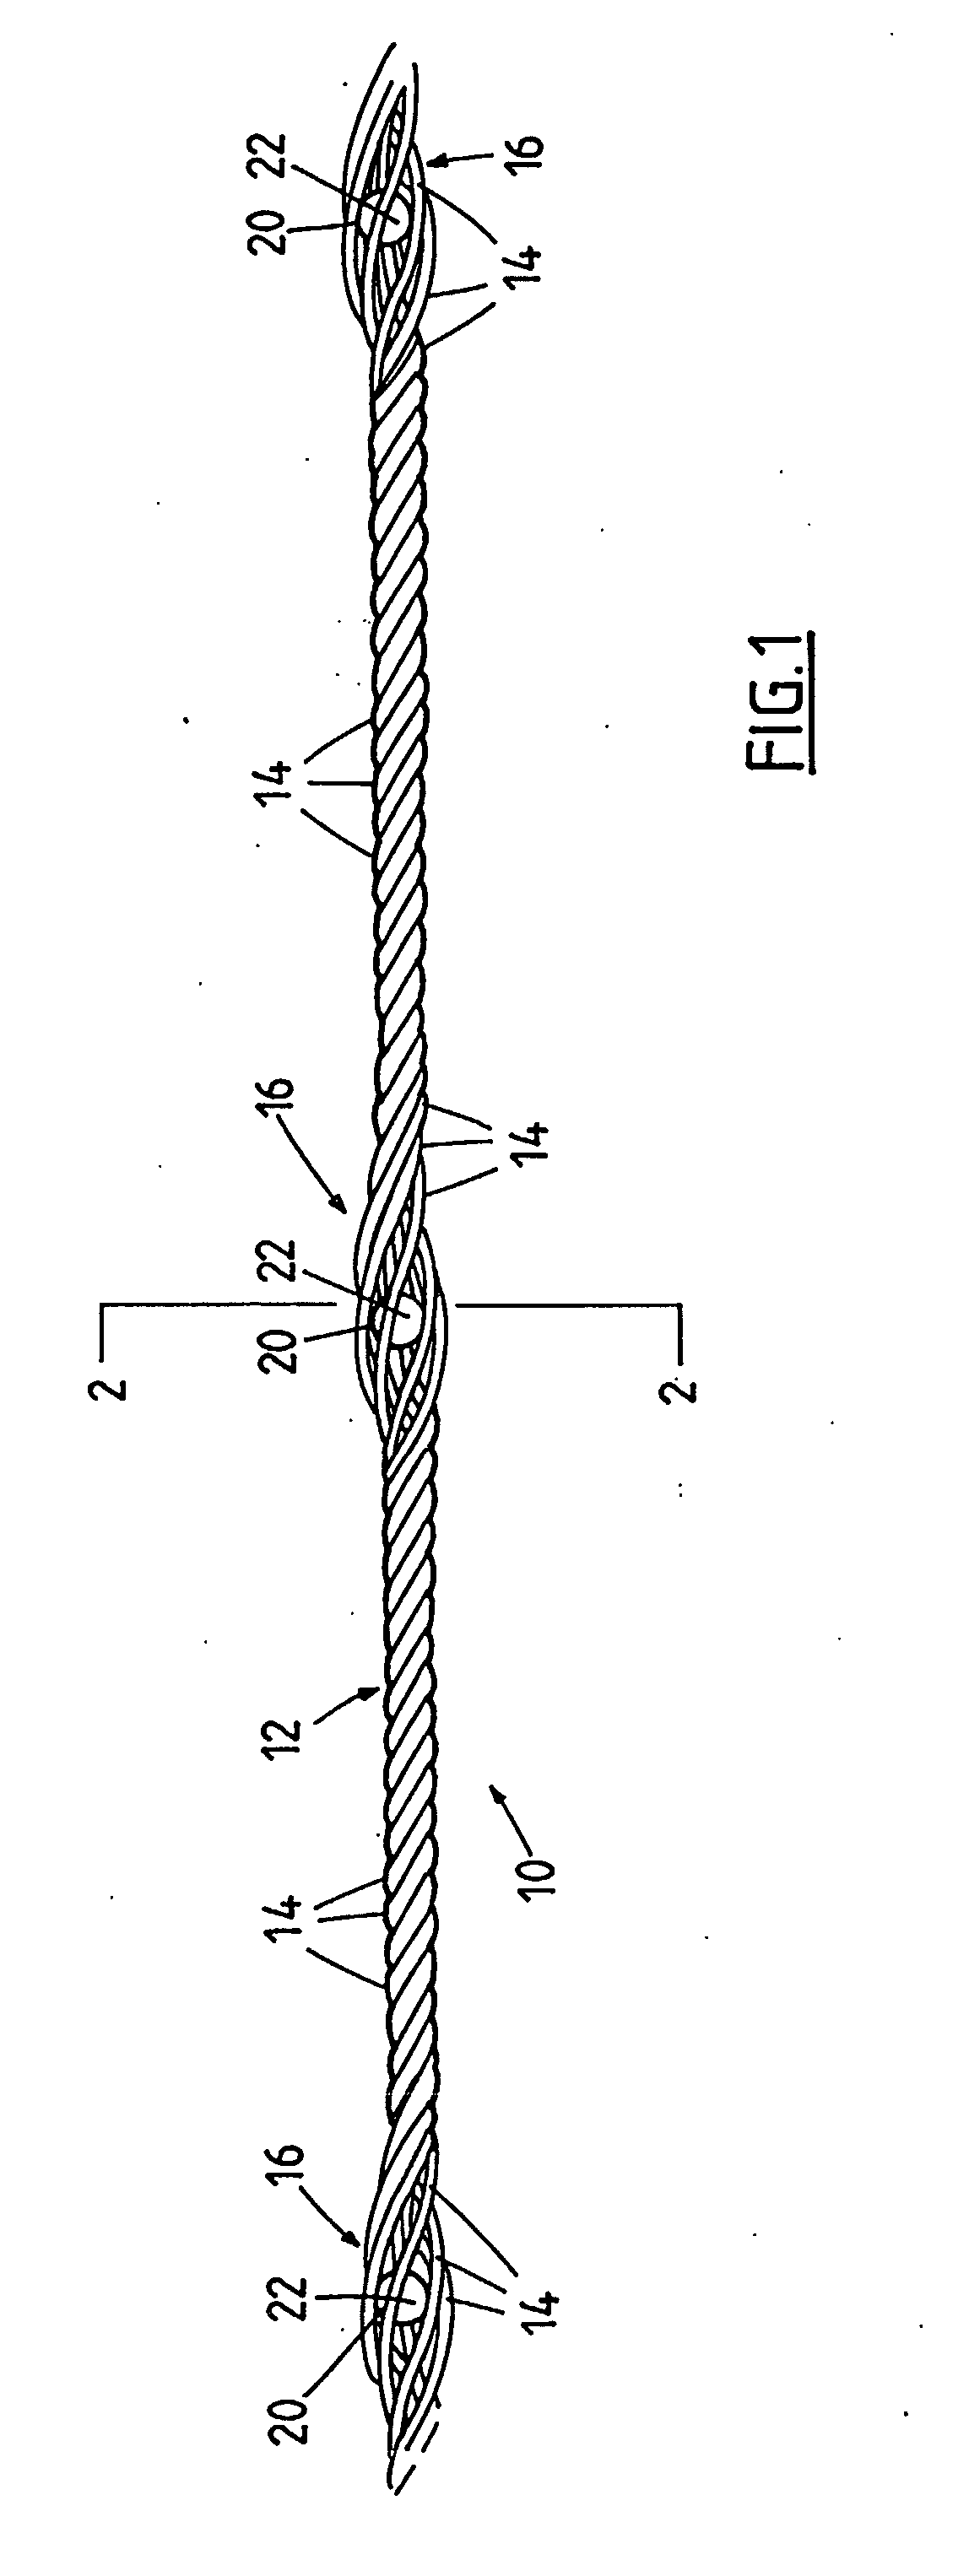 Cable bolt